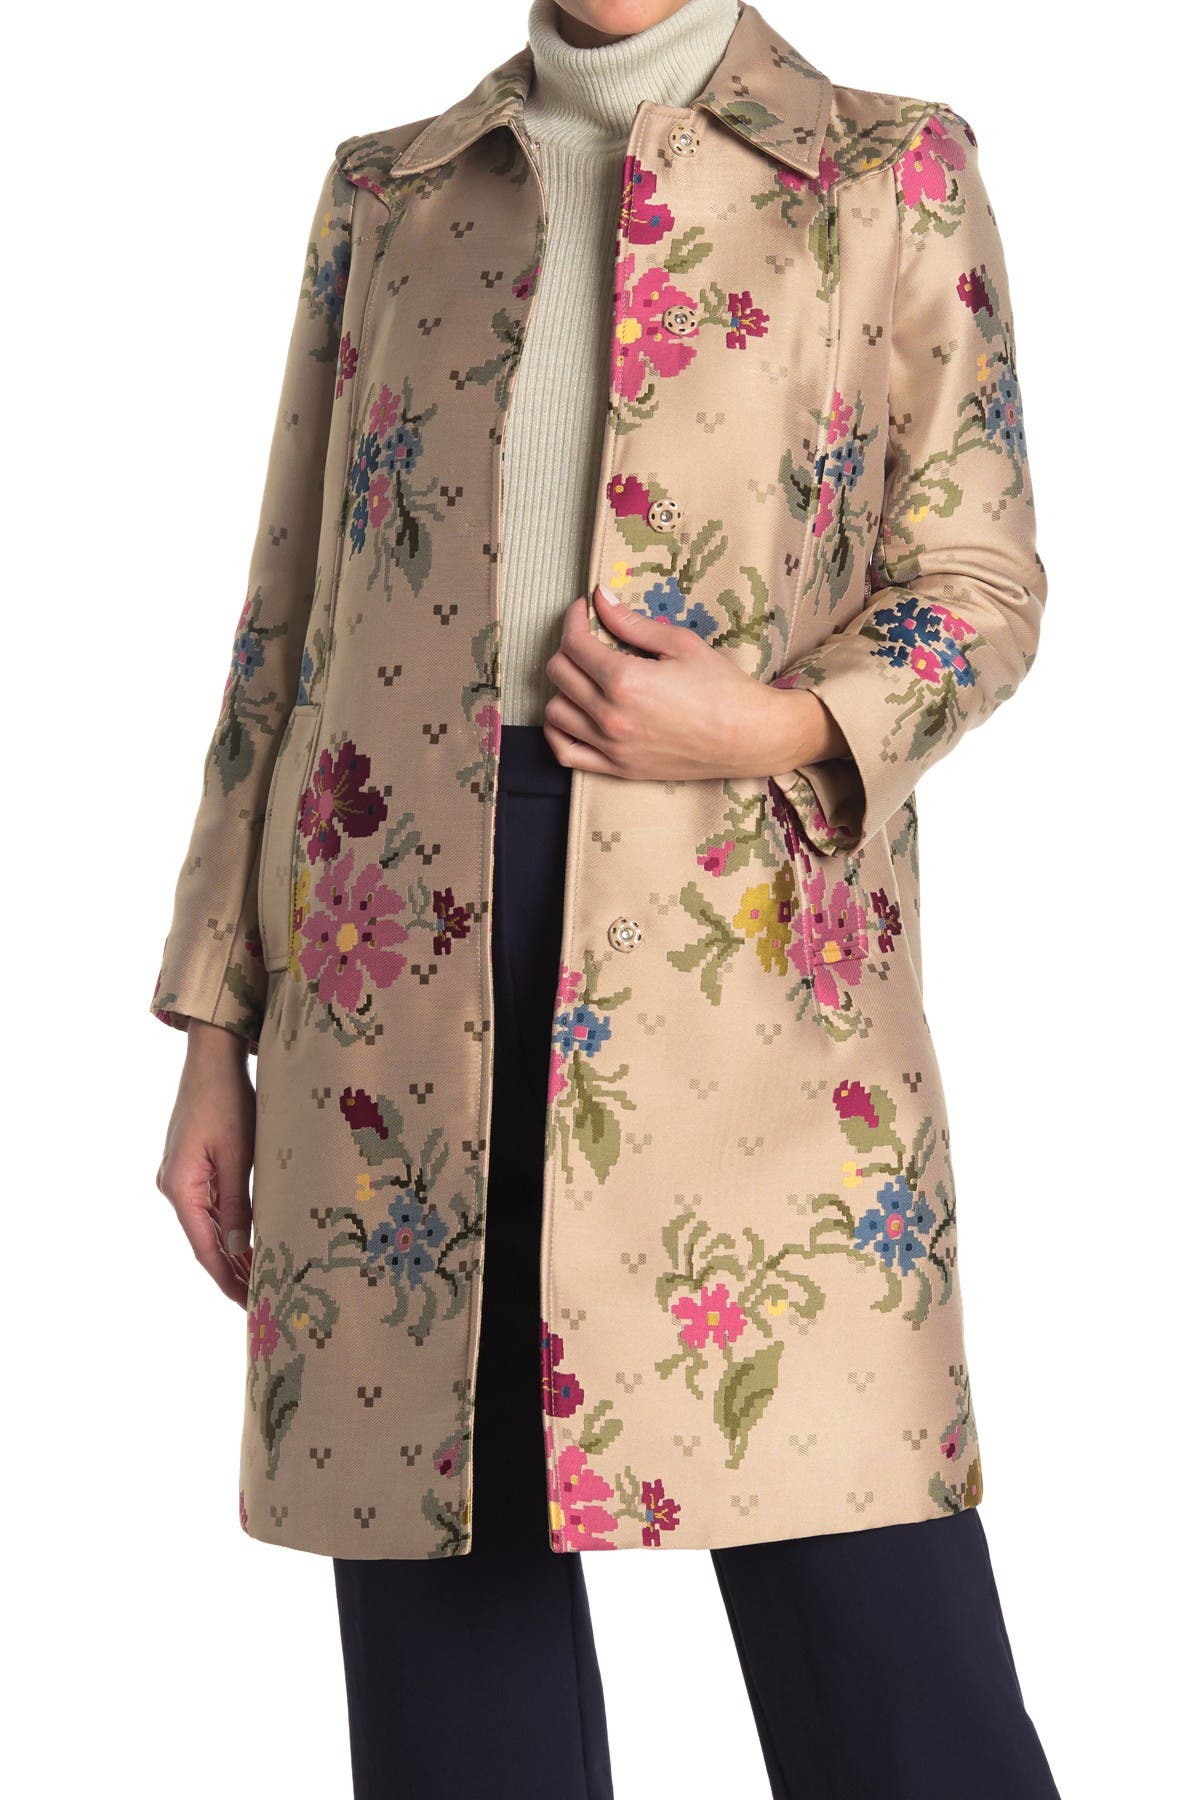 Red Valentino Floral Jacquard Print Coat In Cammello 954